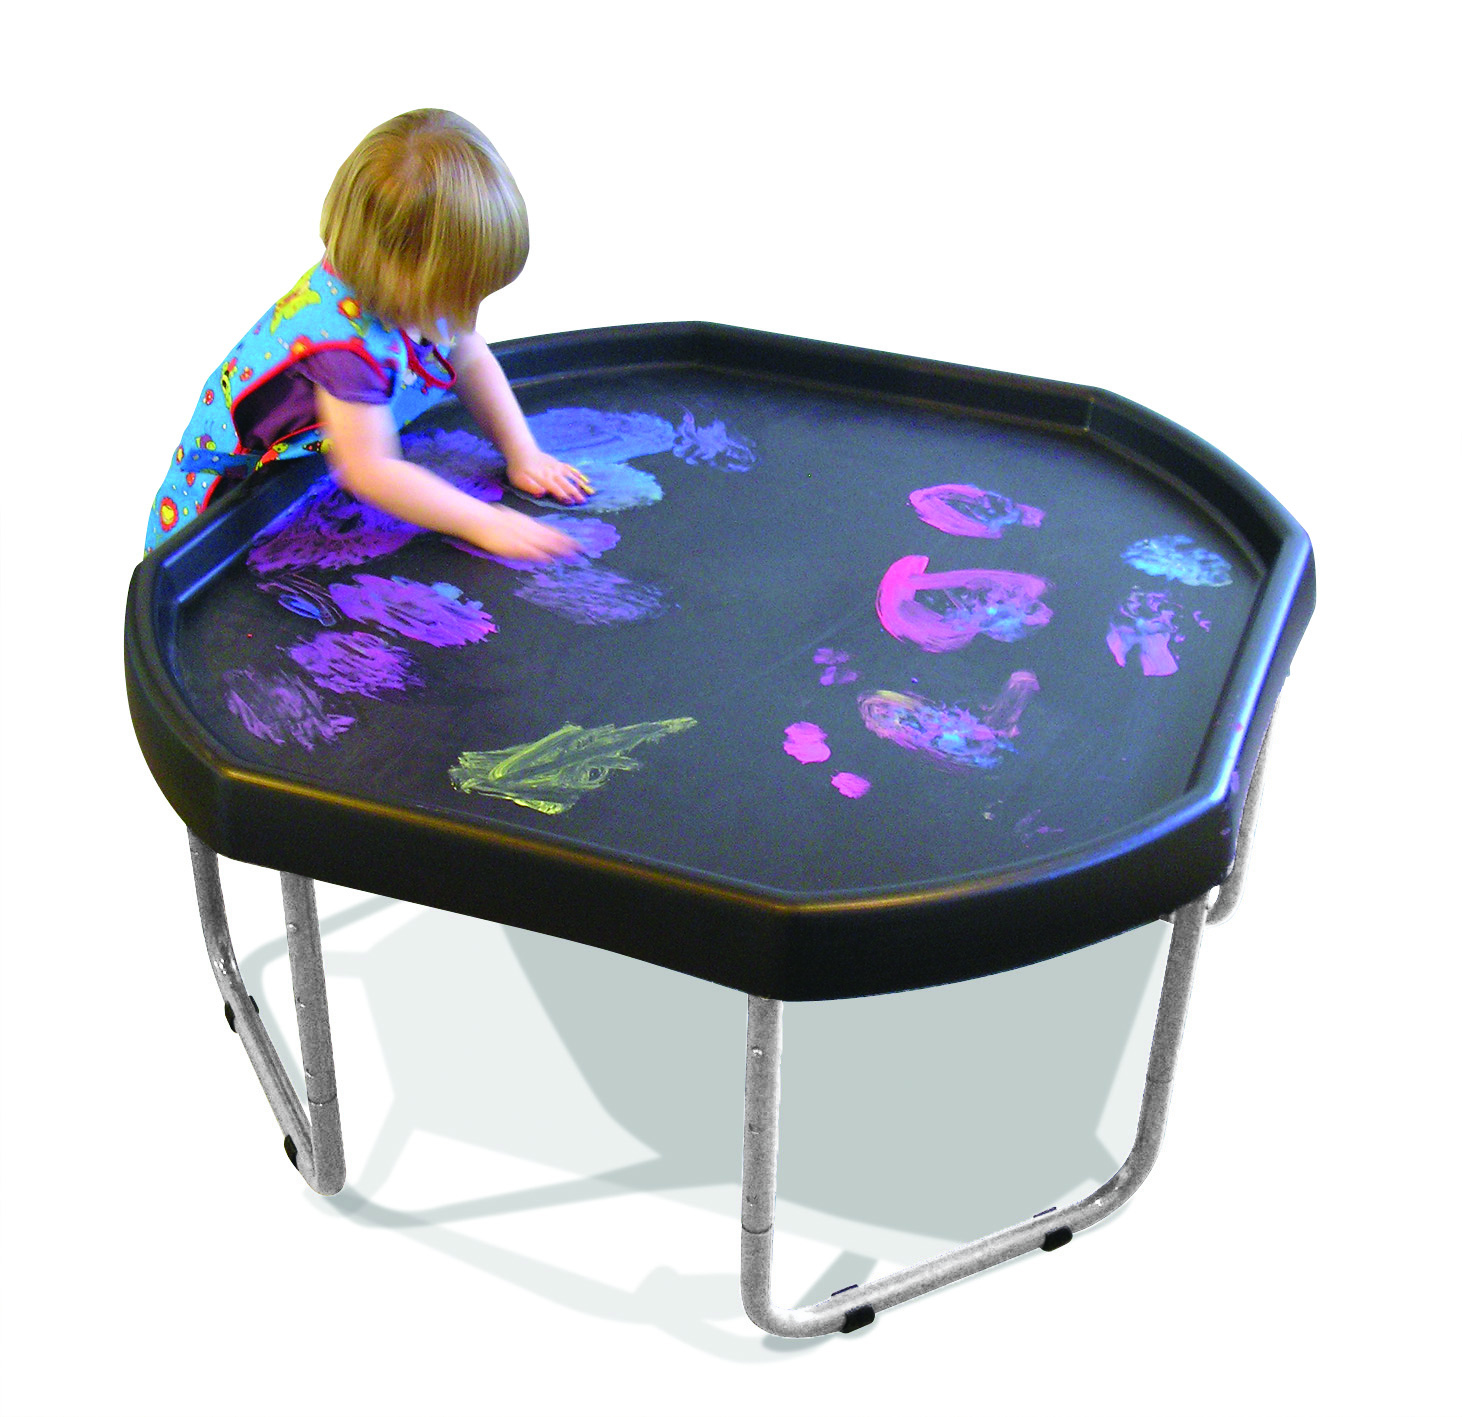 Original Hexacle Sensory Play Tuff Tray and Stand - 6 Colour Options